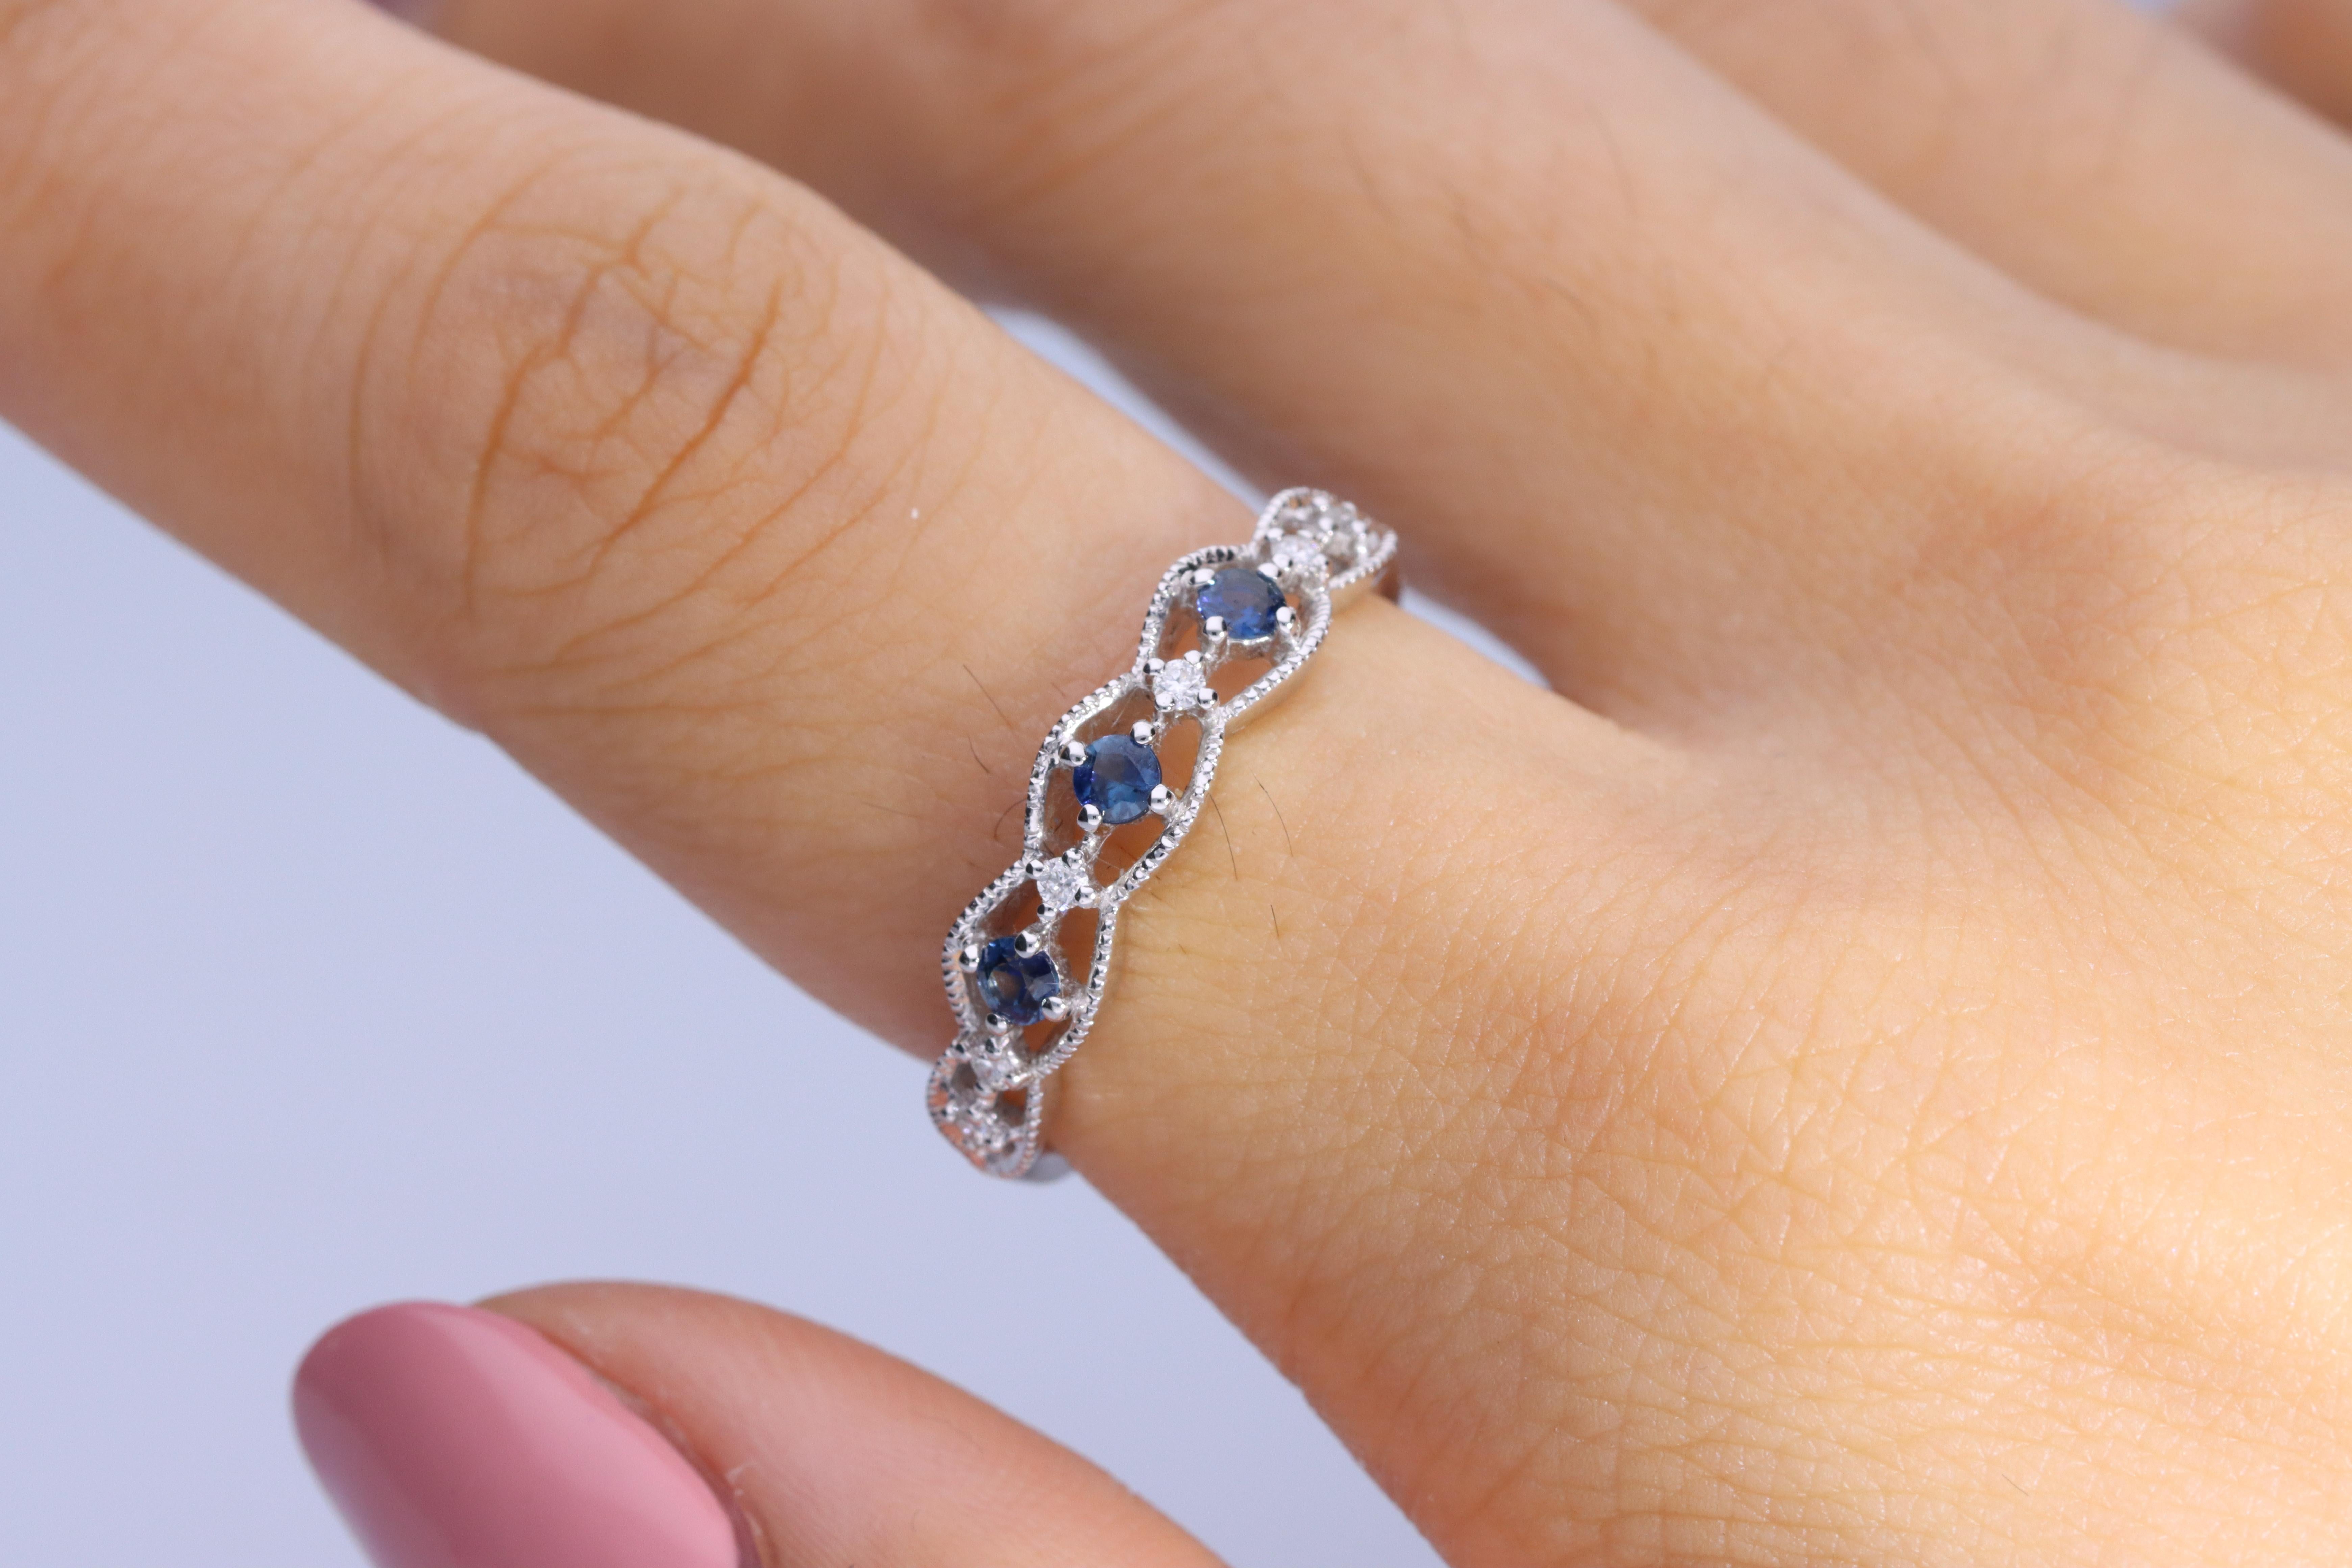 Stunning, timeless and classy eternity Unique Ring. Decorate yourself in luxury with this Gin & Grace Ring. The 18k White Gold jewelry boasts Round Cut Prong Setting Genuine Blue Sapphire (3 pcs) 0.23 Carat, along with Natural Round cut white